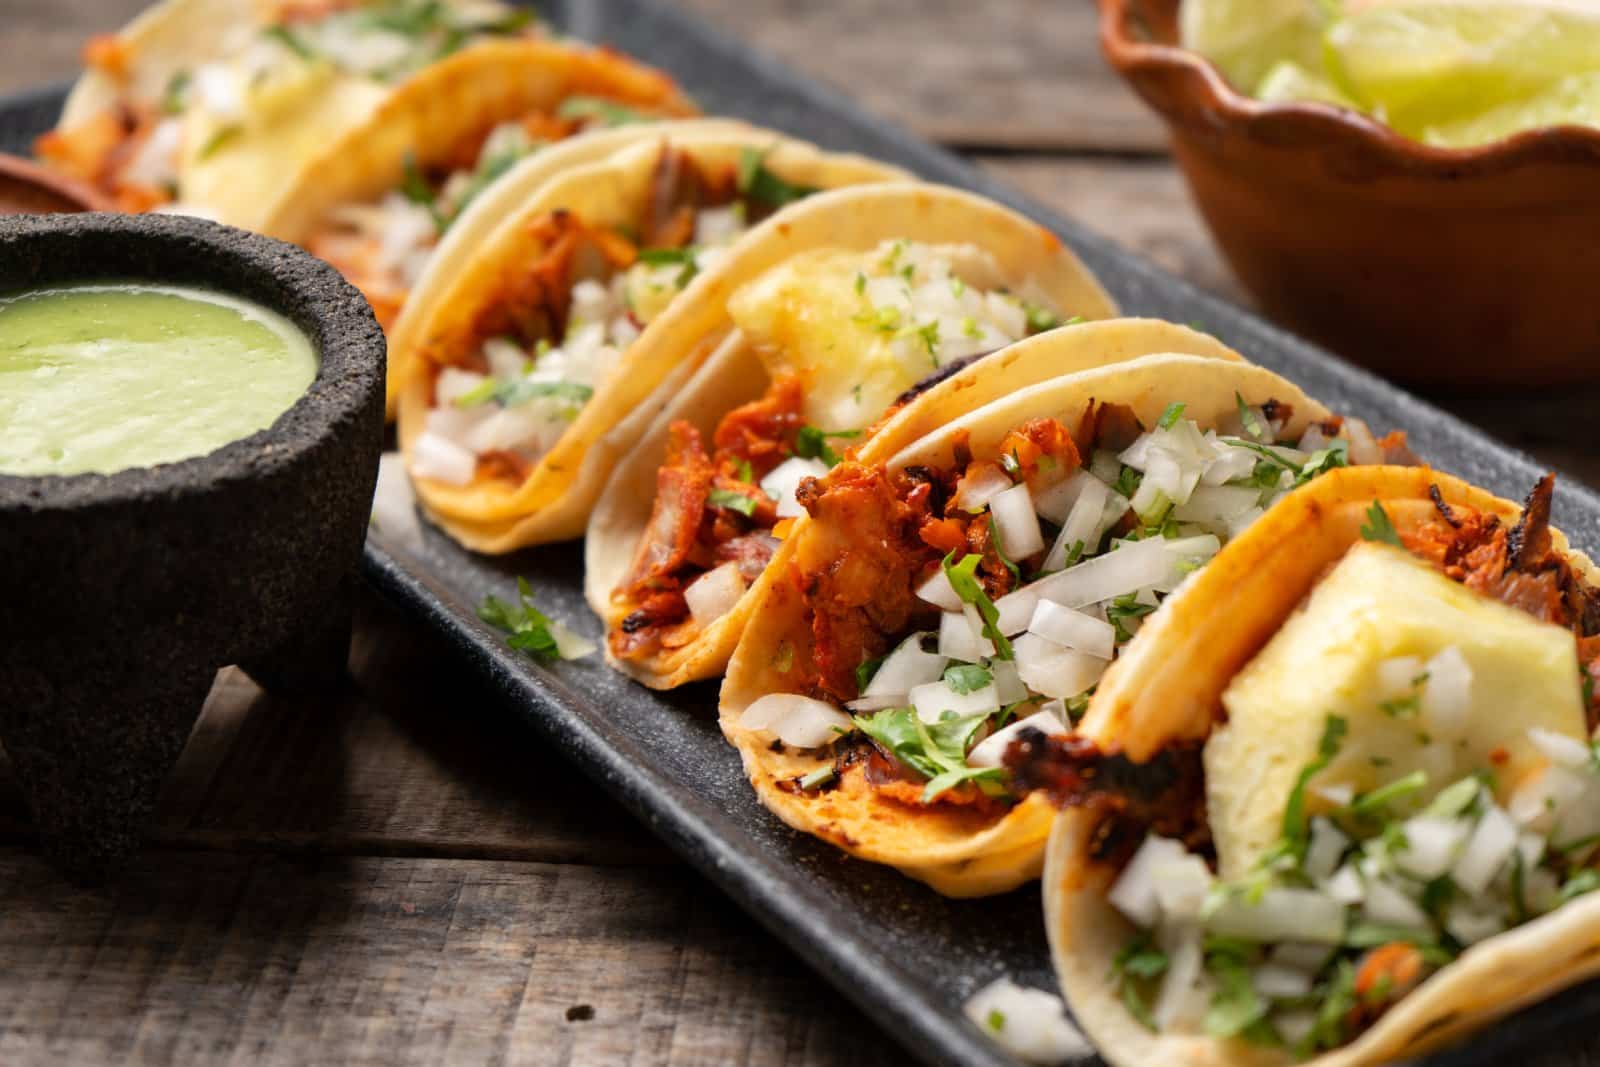 Image Credit: Shutterstock / Guajillo studio <p><span>A glorious result of Lebanese immigrants in Mexico, these tacos feature spit-grilled pork served on corn tortillas, garnished with pineapple, onions, and cilantro. A bite of history in every bite!</span></p>